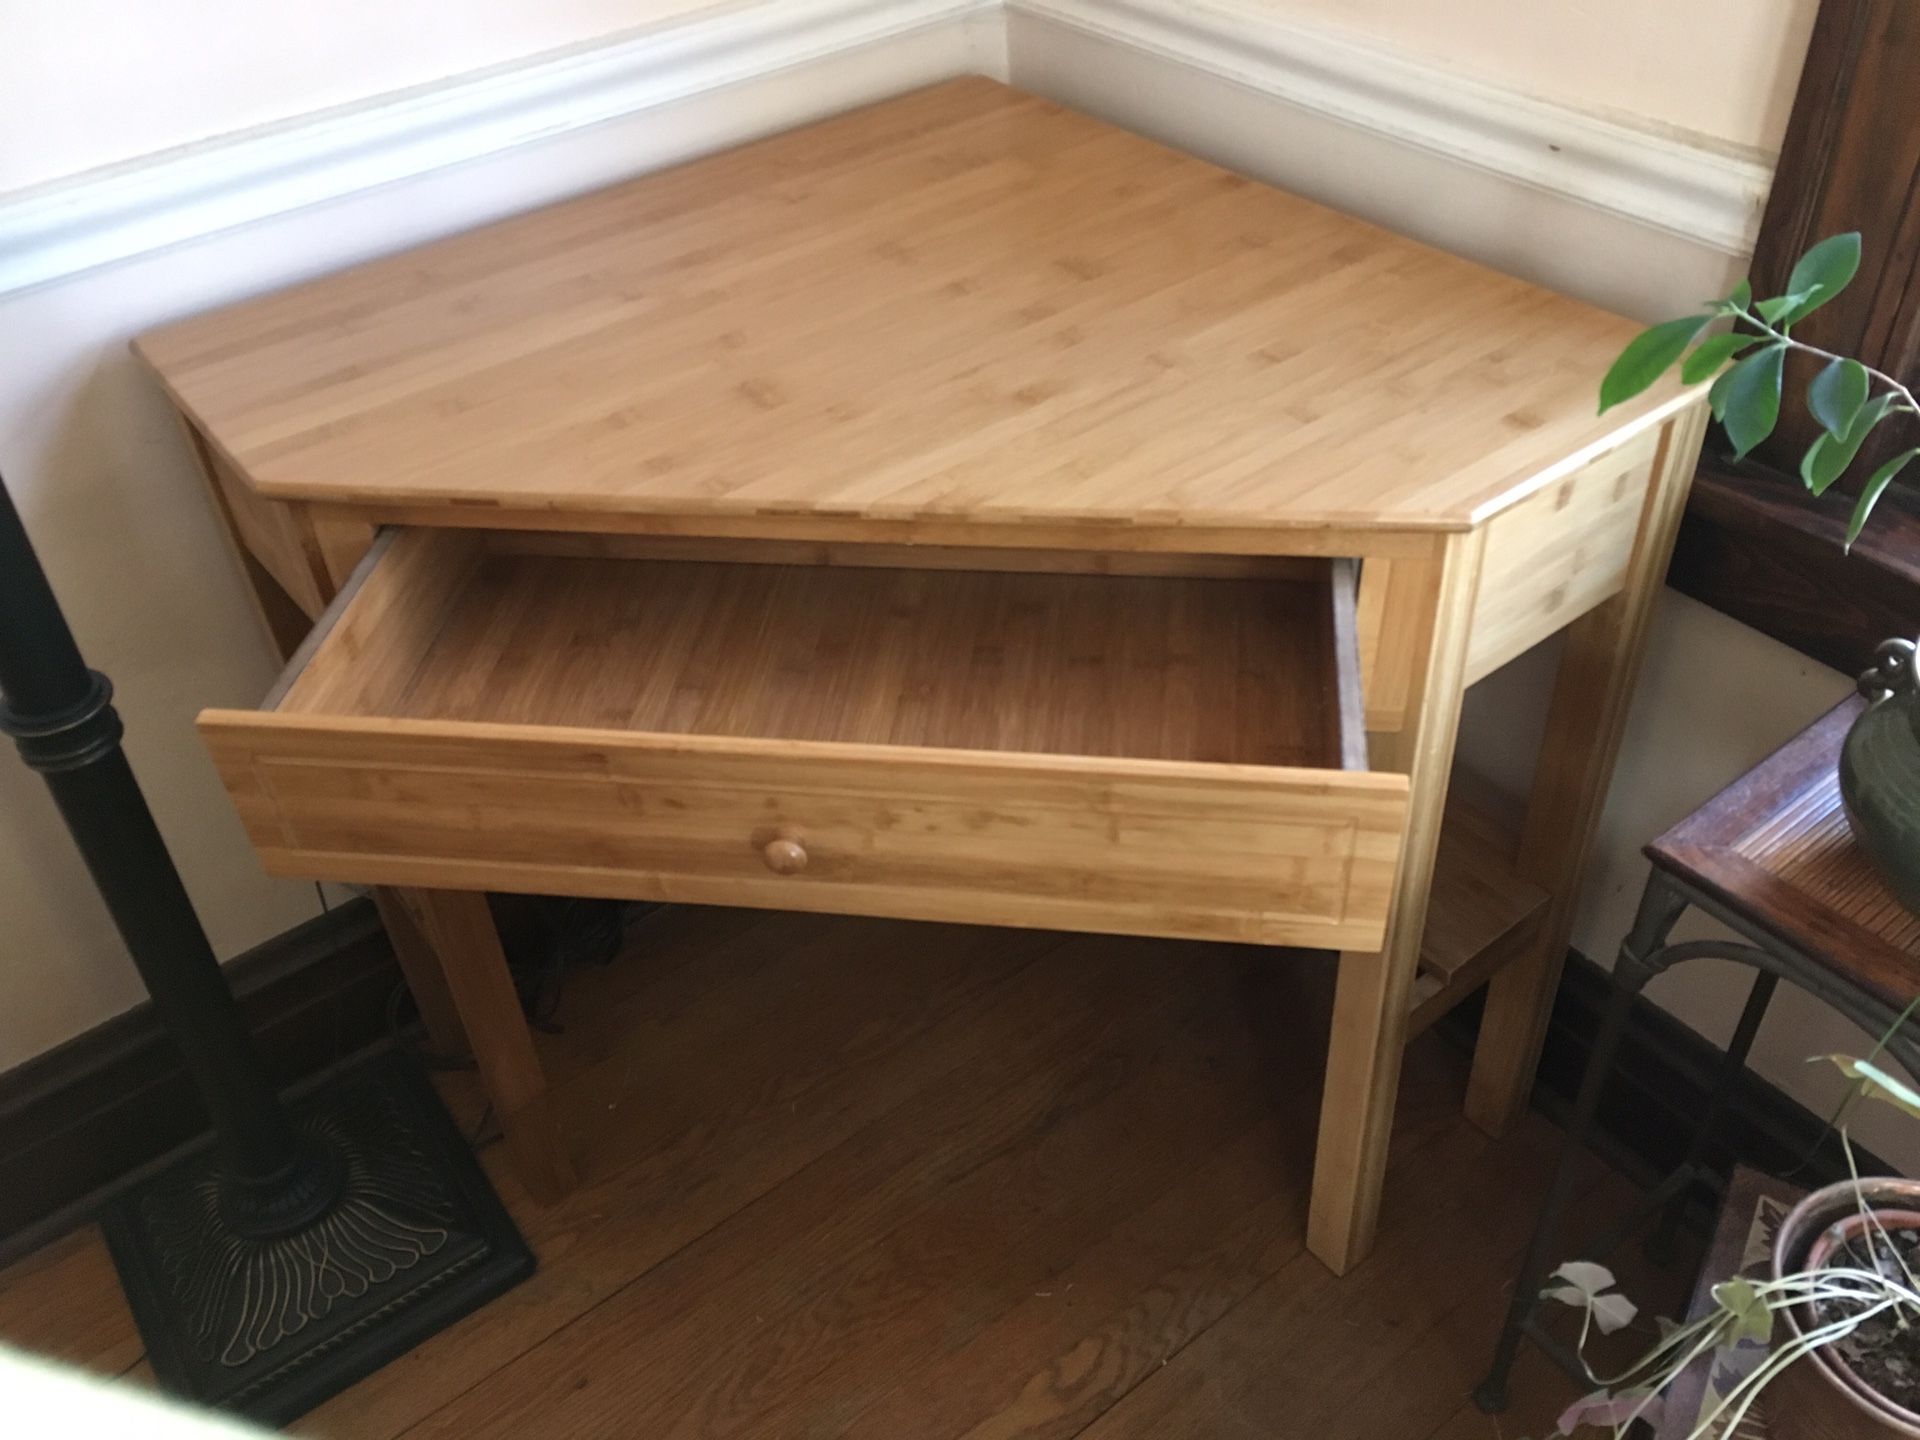 Solid wood corner desk. Has one drawer and a shelf underneath that goes around the desk.